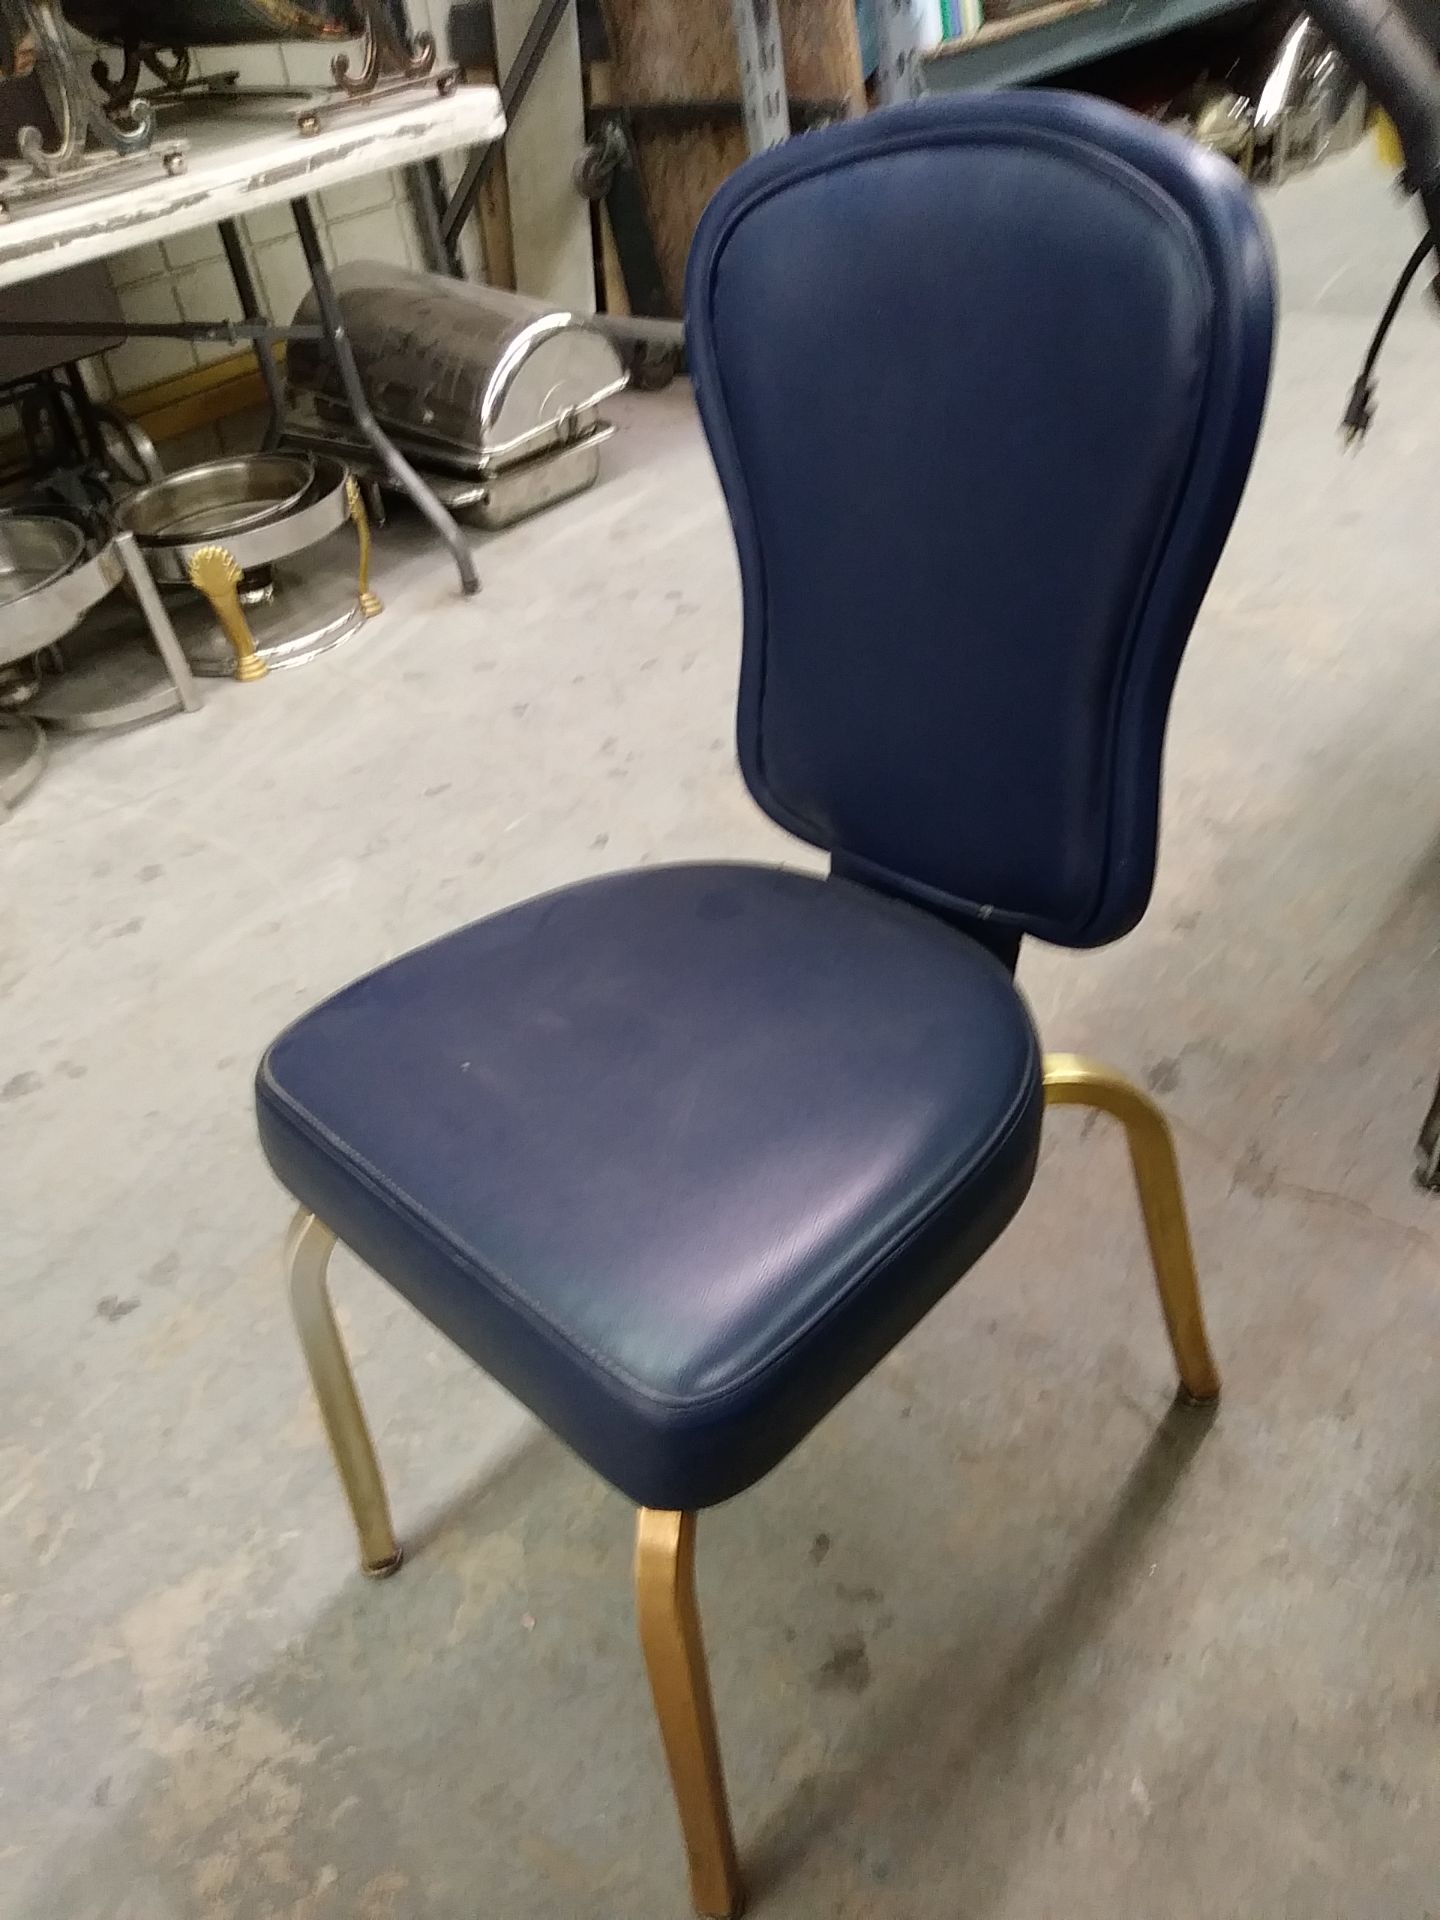 BLUE LEATHER DINING CHAIRS (X MONEY) - Image 3 of 4